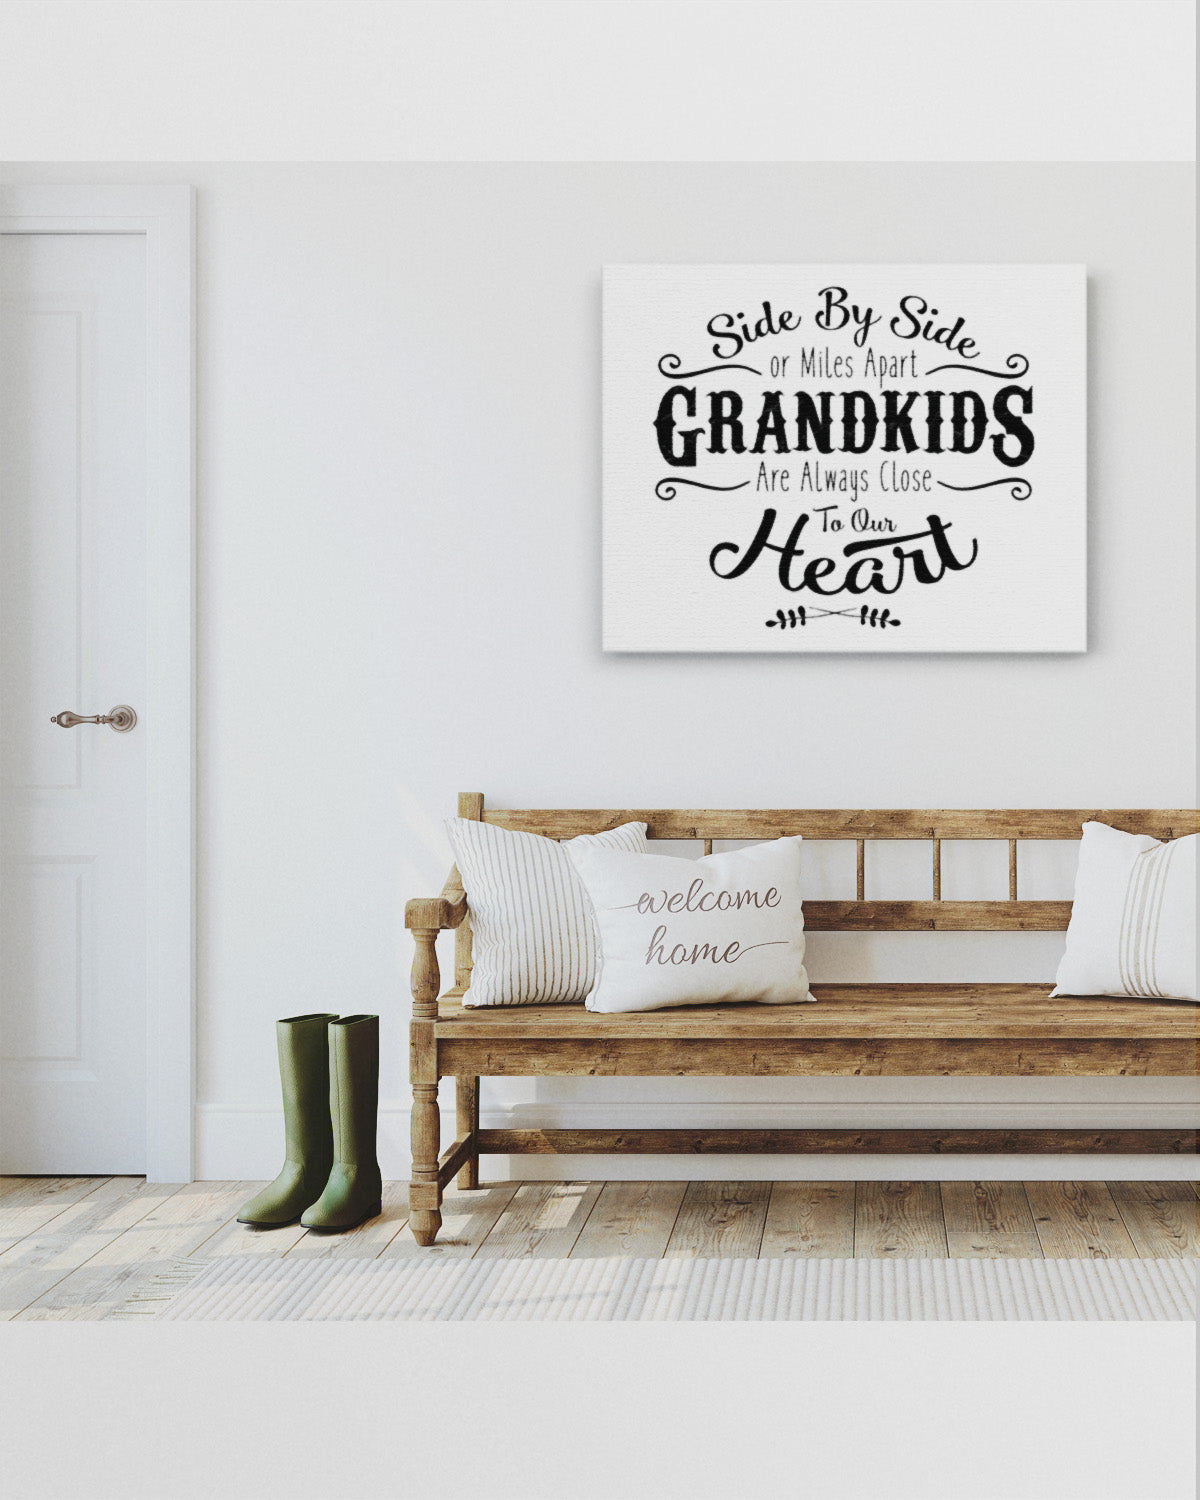 Grandparents Wall Art from Grandkids - Grandparents Day Gift Ideas - Best Gifts for Grandparents Wall Decor - Grandparent Gift - Gifts for Grandparents